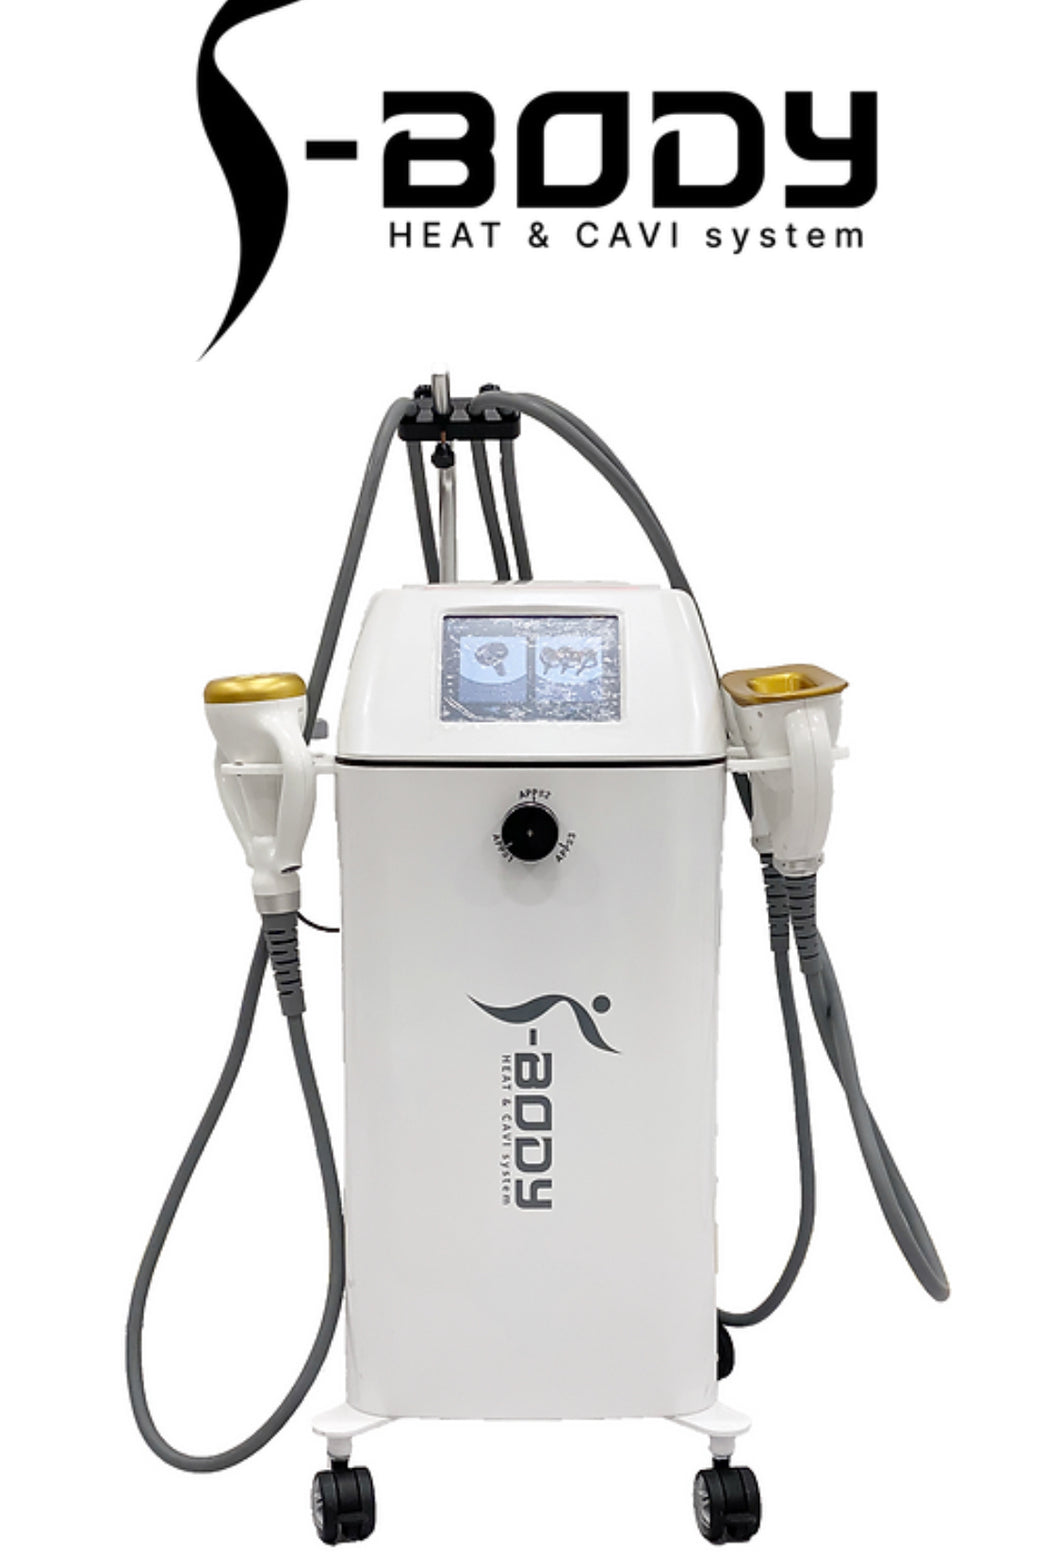 New S-Body Lipomassage+ Cavitation + Thermotherapy All in One Body Contouring, Cellulite and Lymphatic Drainage Machine